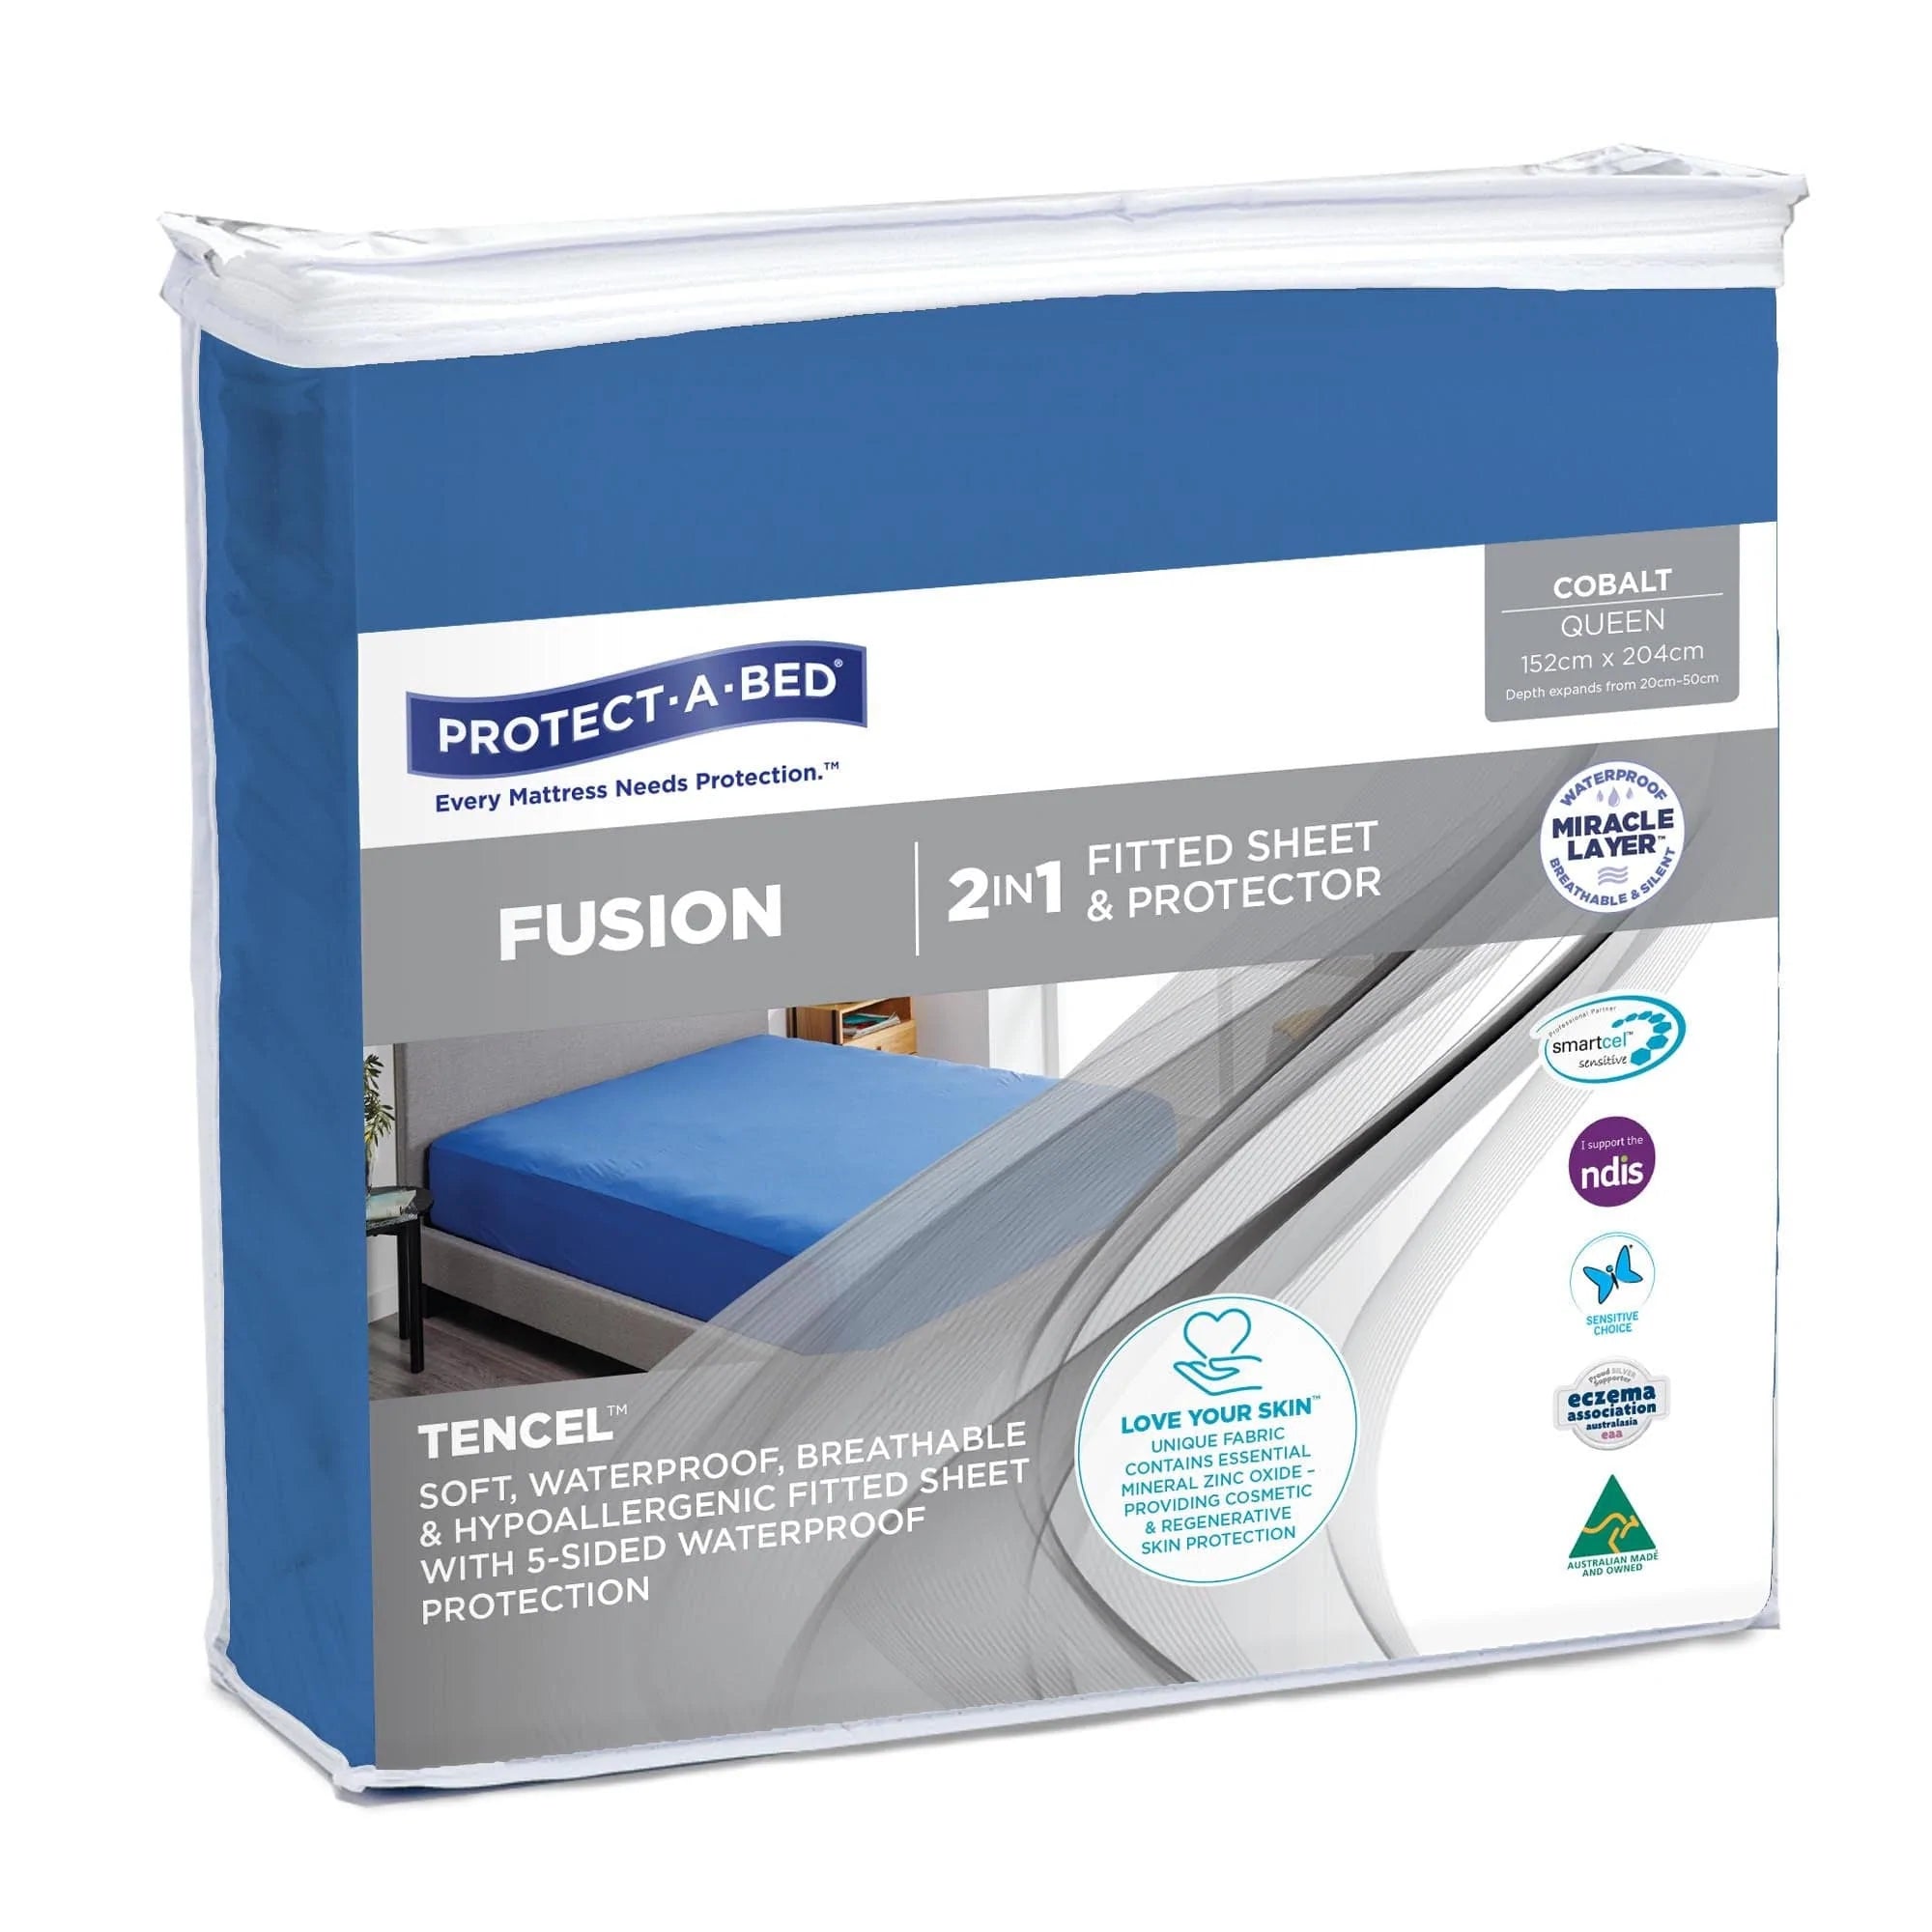 Protect A Bed Queen / Colbalt Fusion Fitted Sheet SNUF0092QUE0__EA